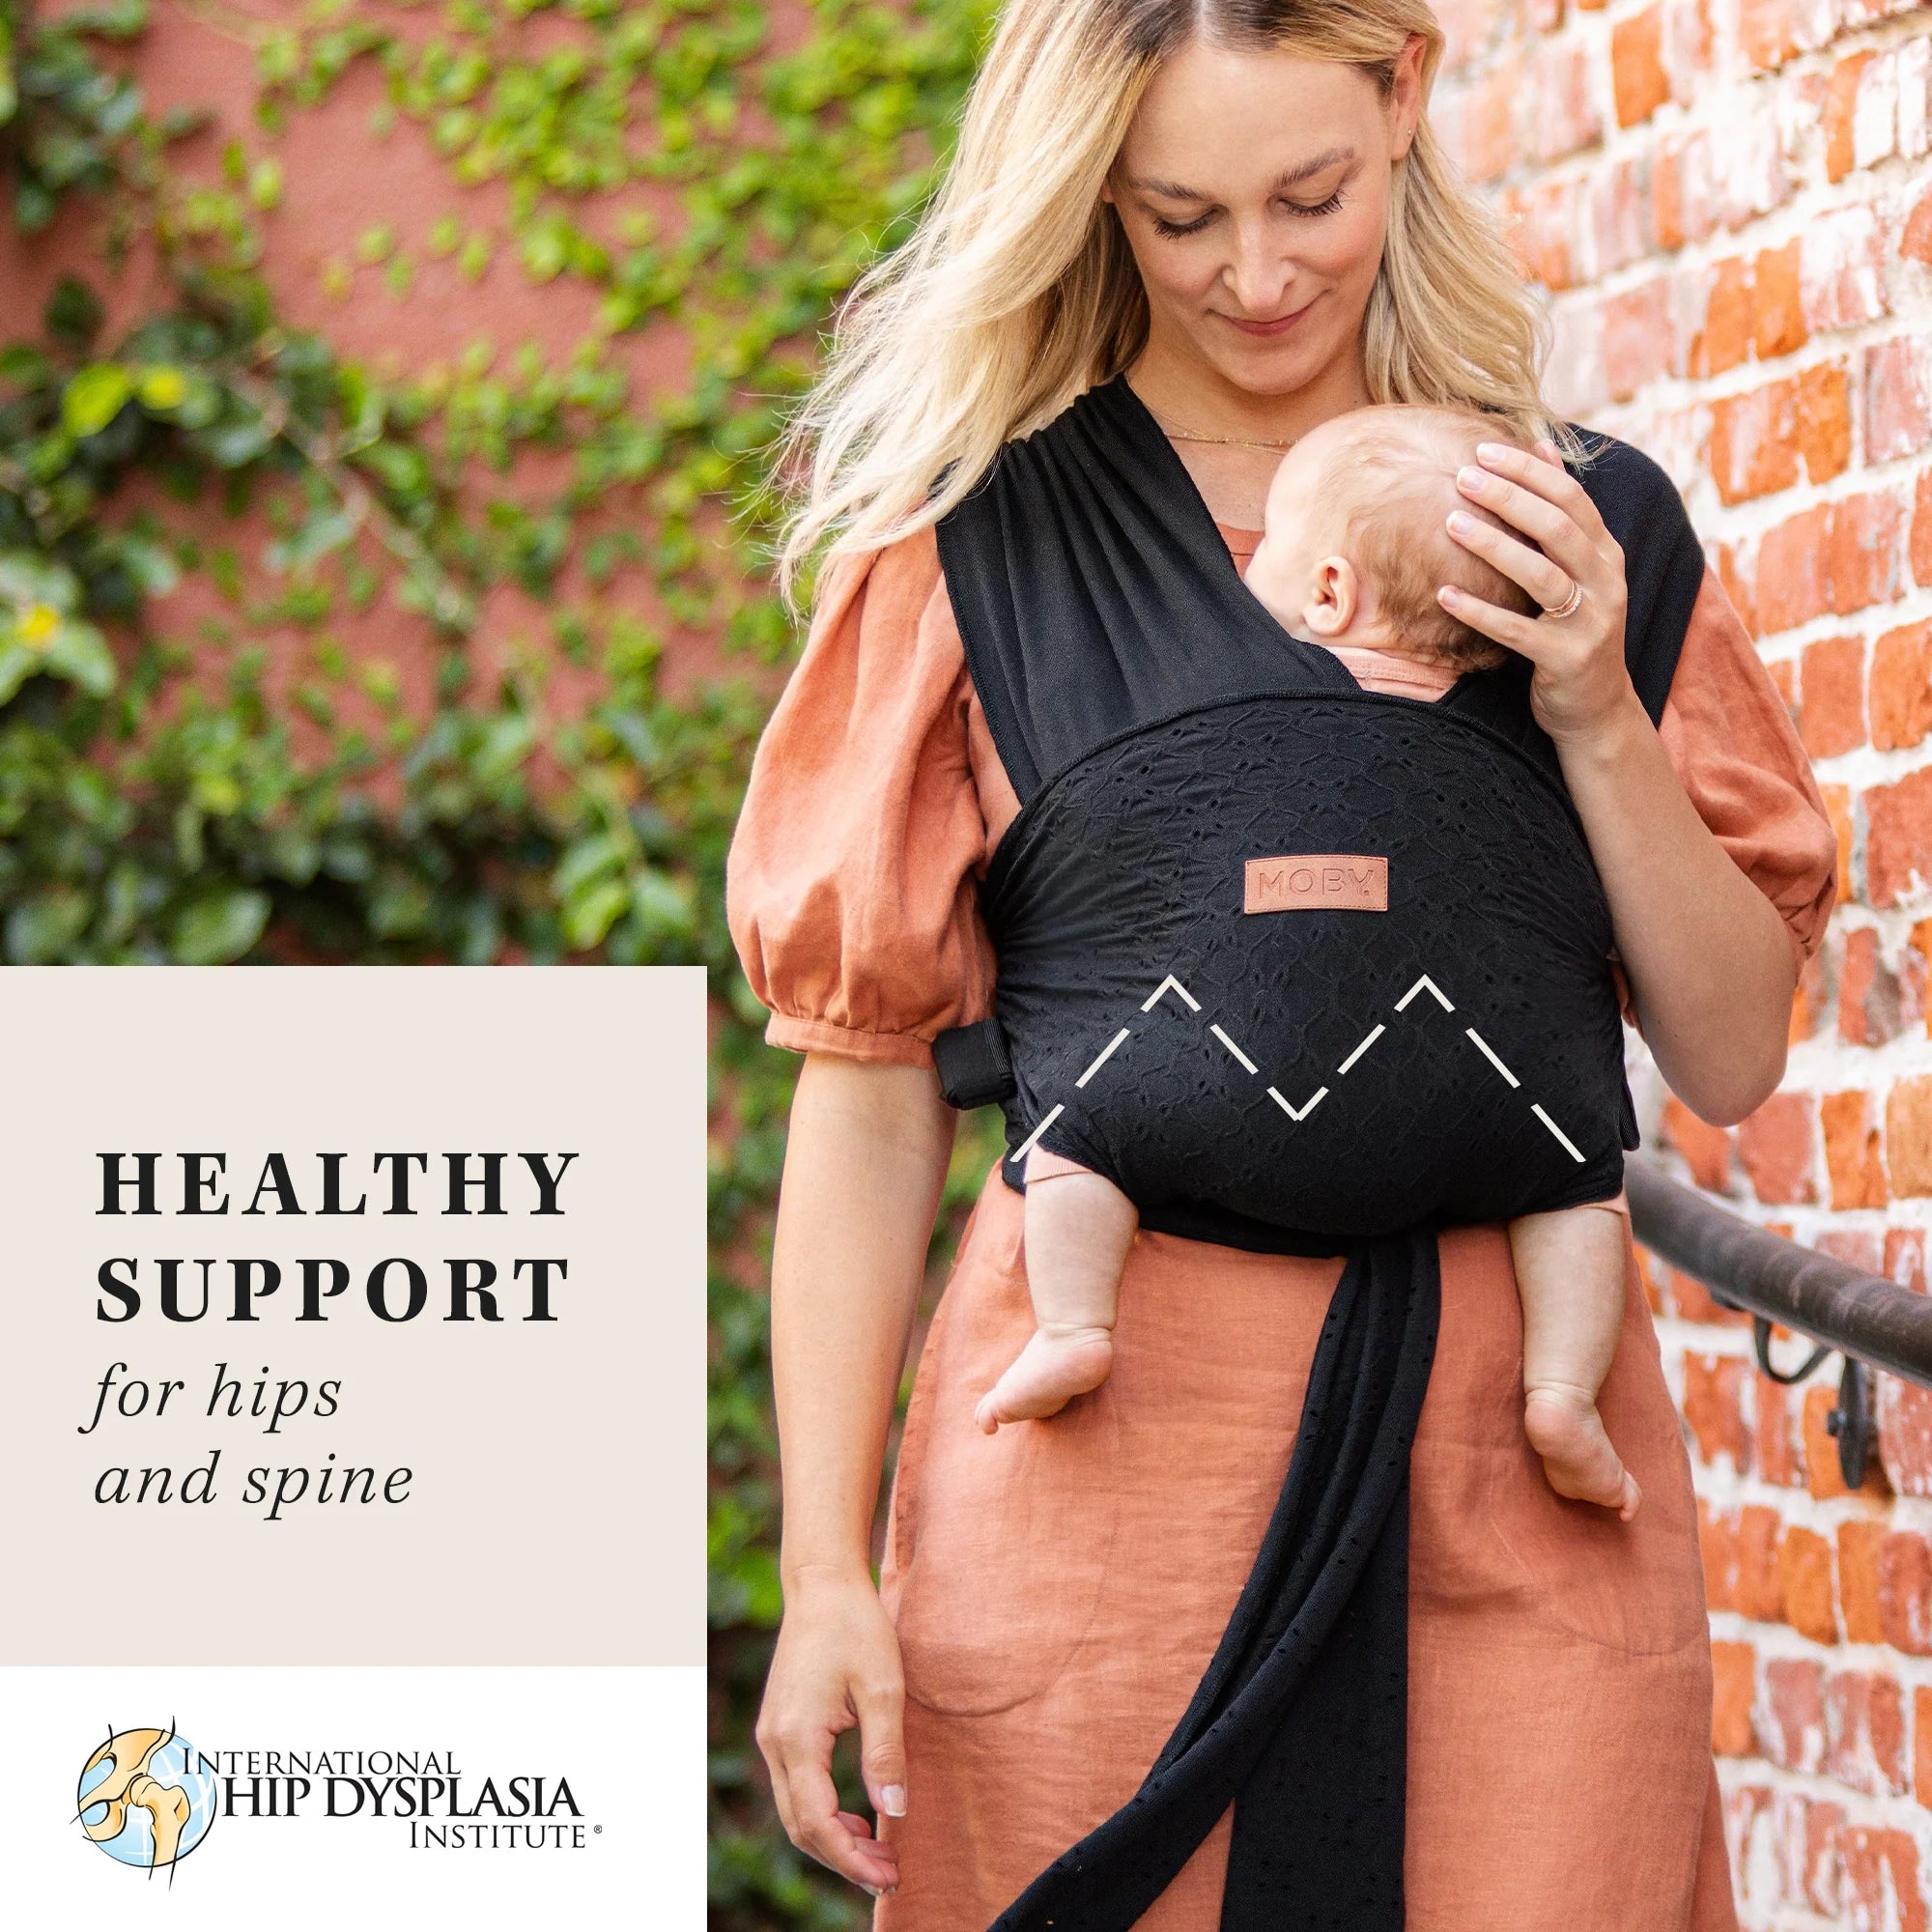 Easy-wrap Carrier By Petunia Pickle Bottom - Black Eyelet